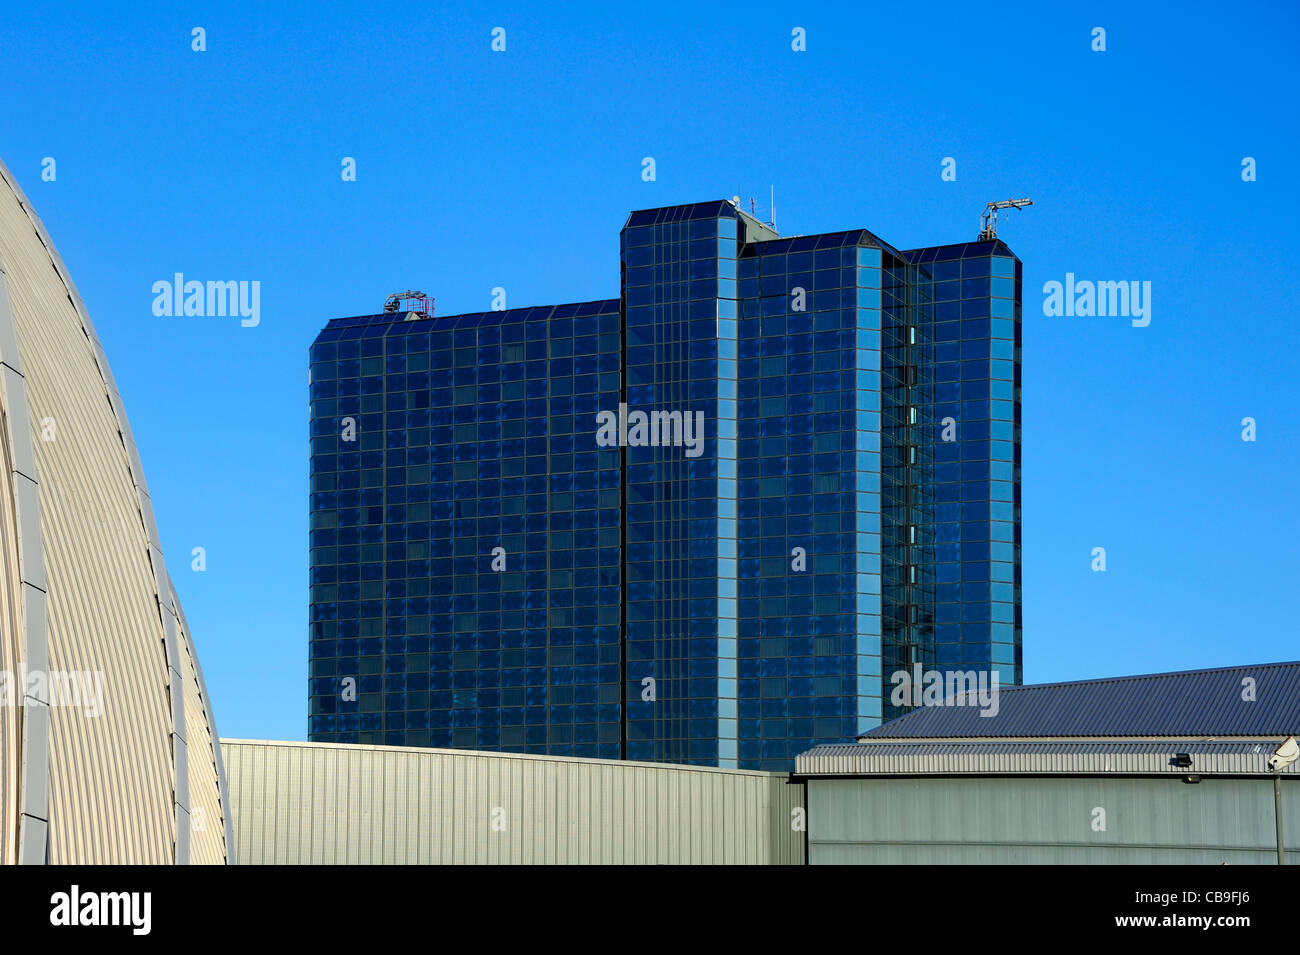 Hotel in a harsh urban setting. Not a natural thing in sight. Stock Photo